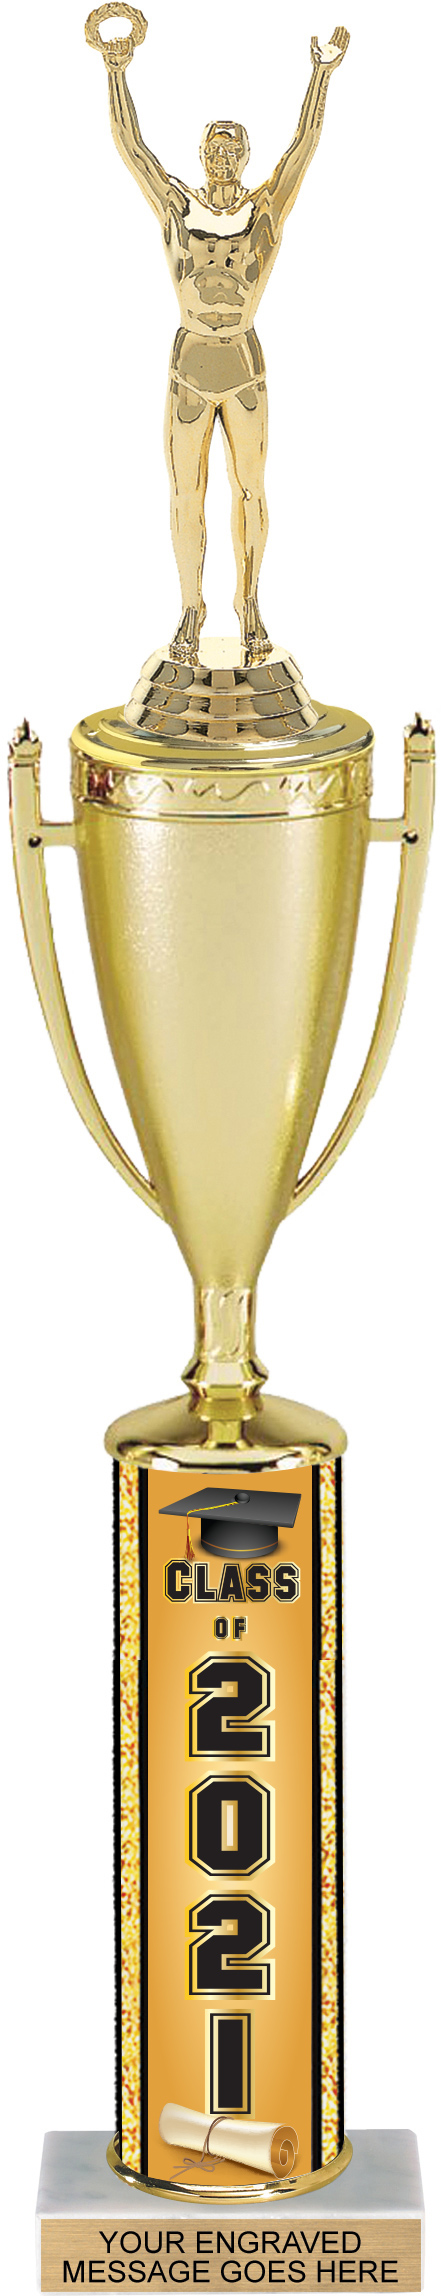 17 inch Class of 2021 Column Cup Trophy